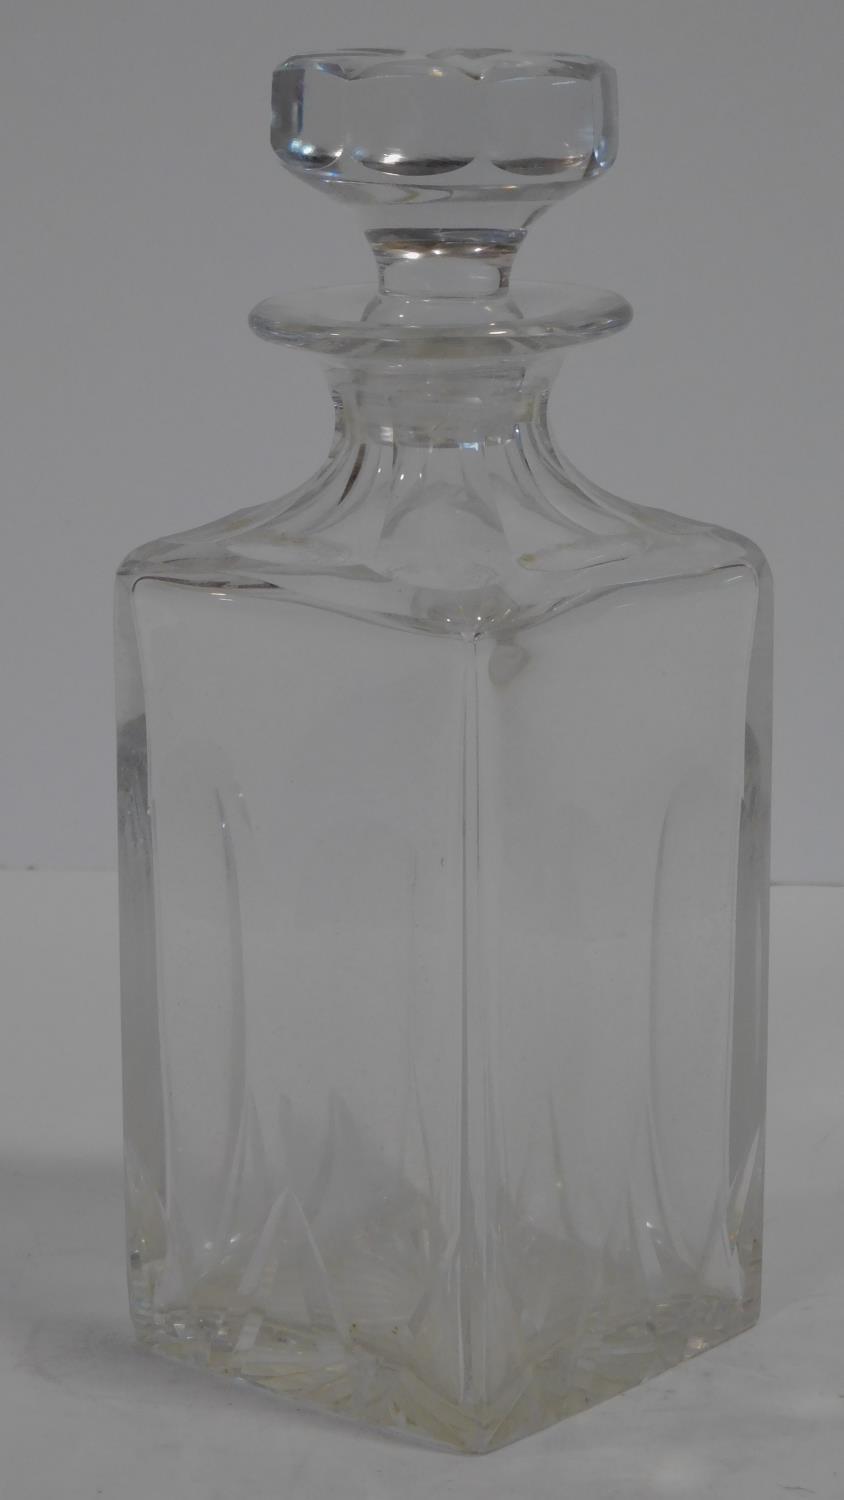 A Cartier French cut square crystal decanter with star cut design stopper. Signed to the base. H. - Image 2 of 6